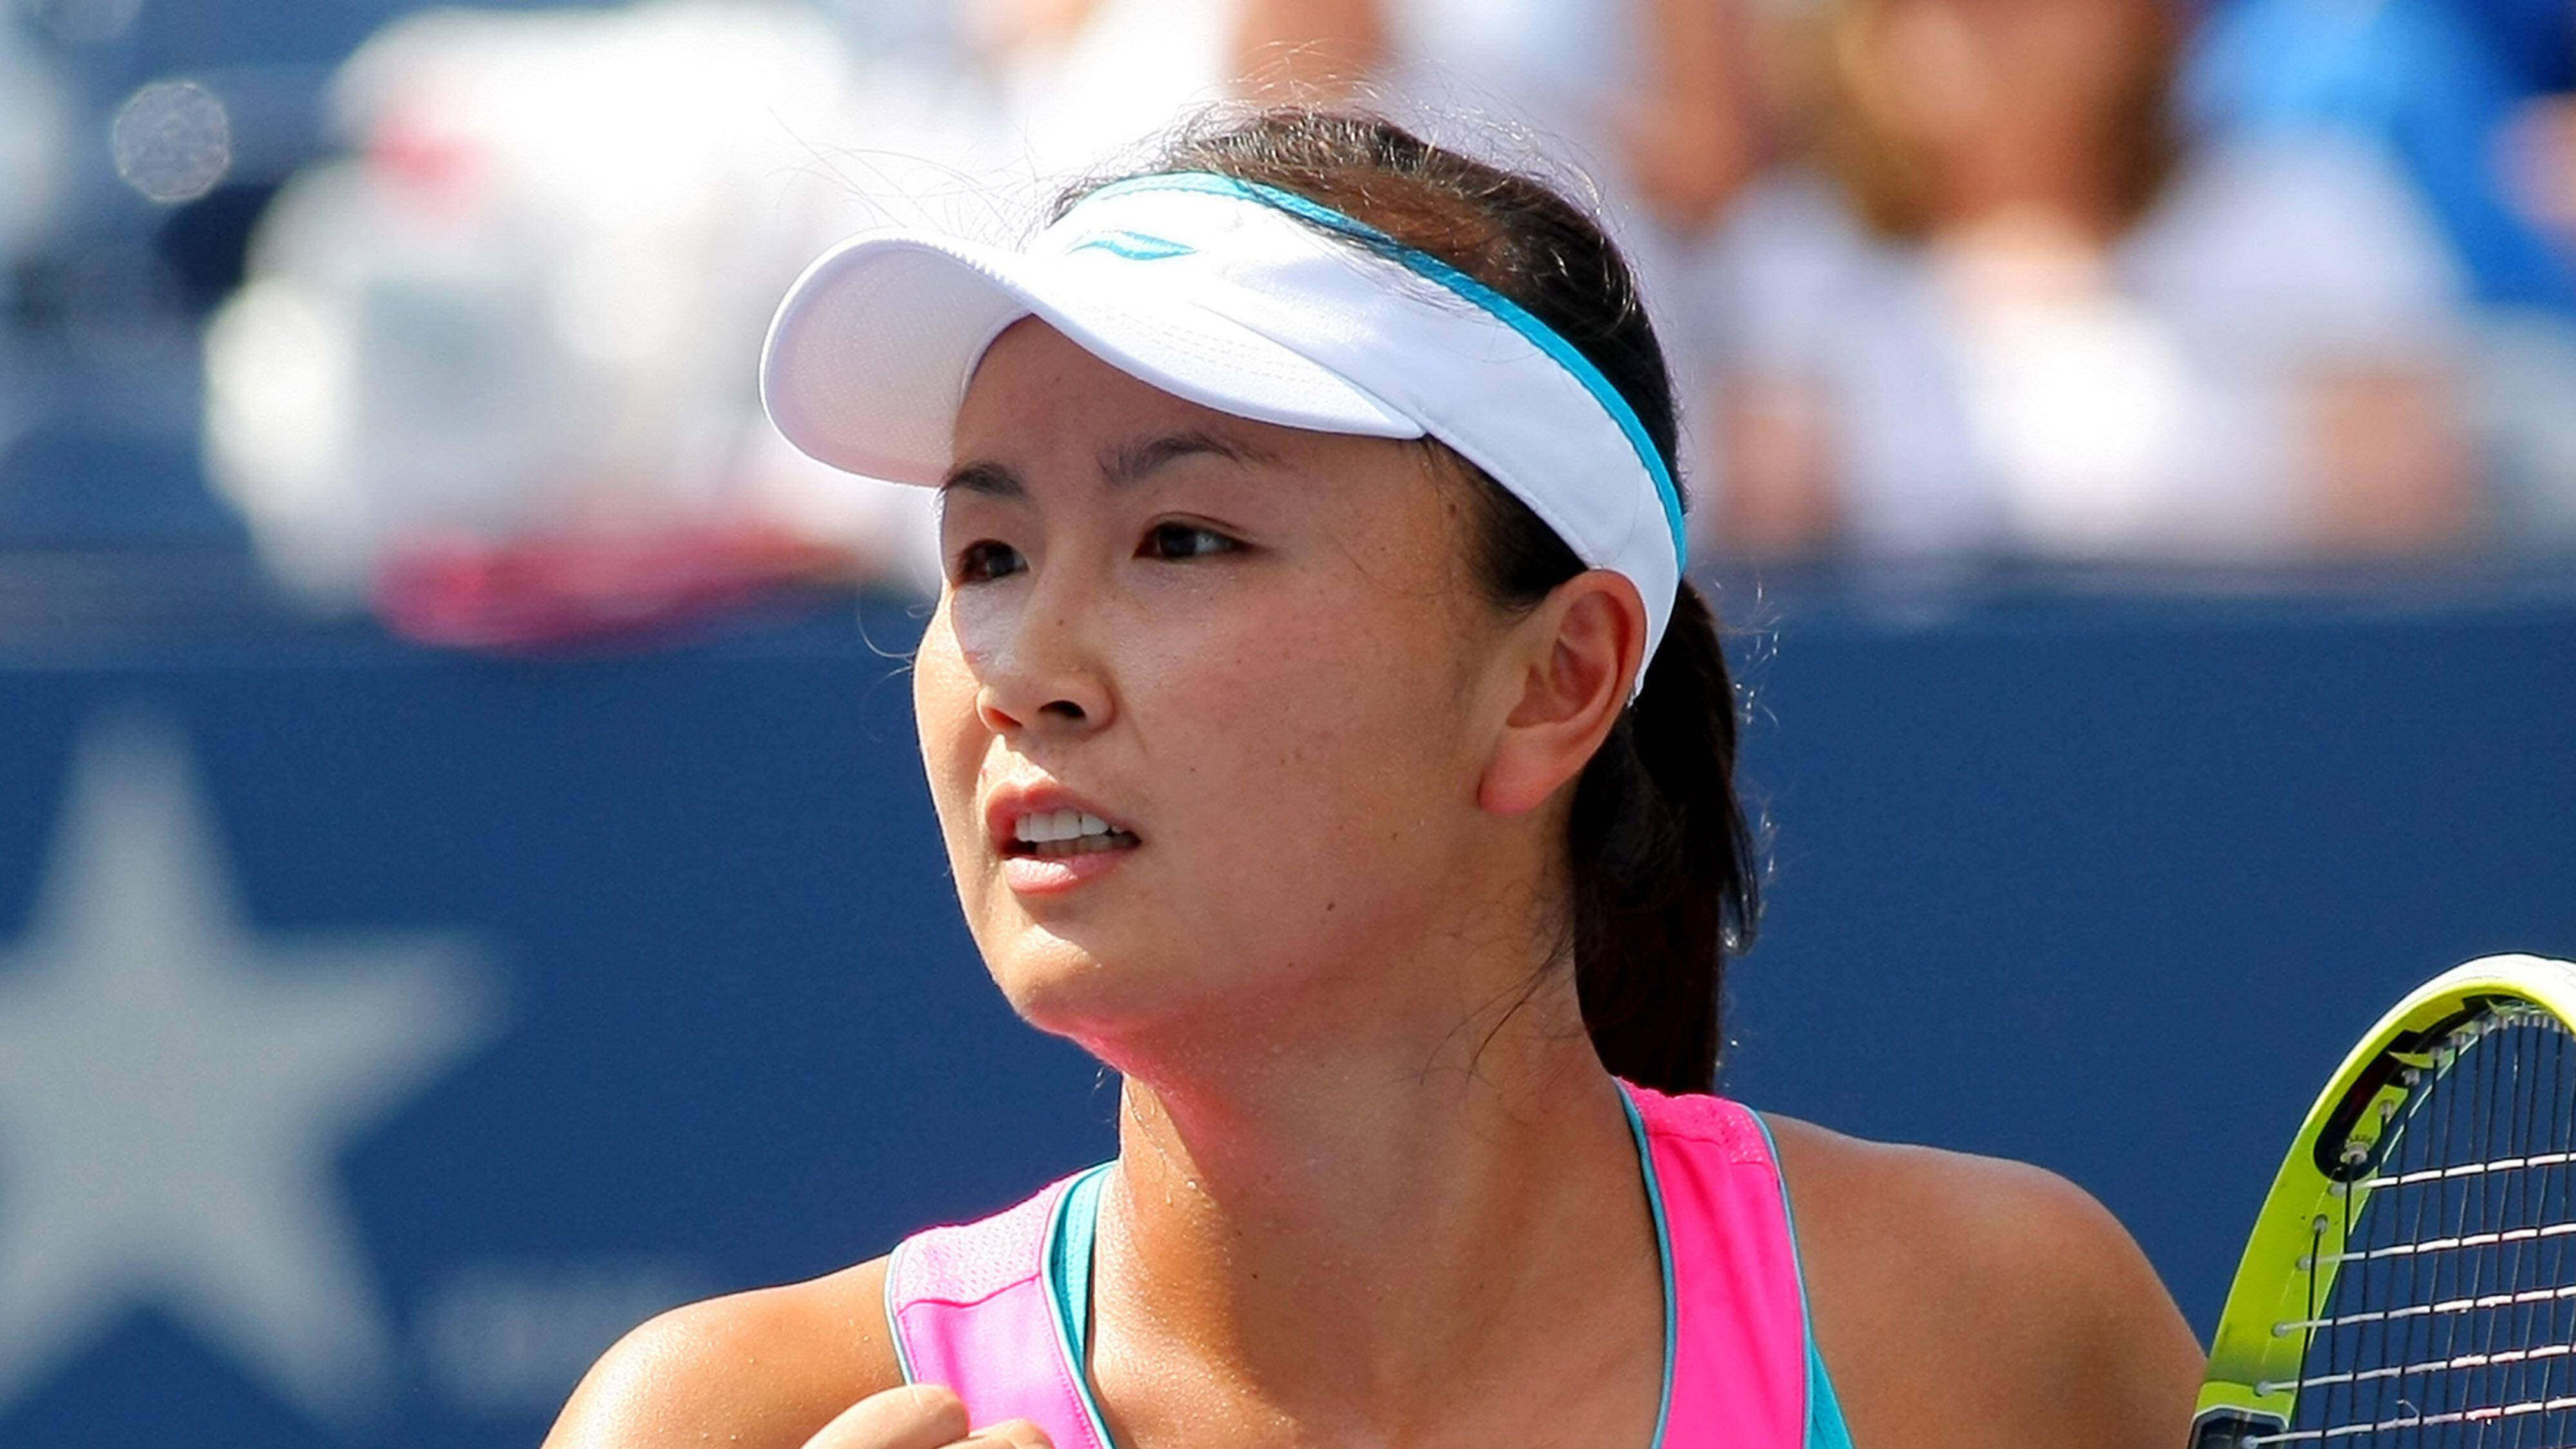 The Peng Shuai case: the World Tennis Association cancels all its tournaments in China